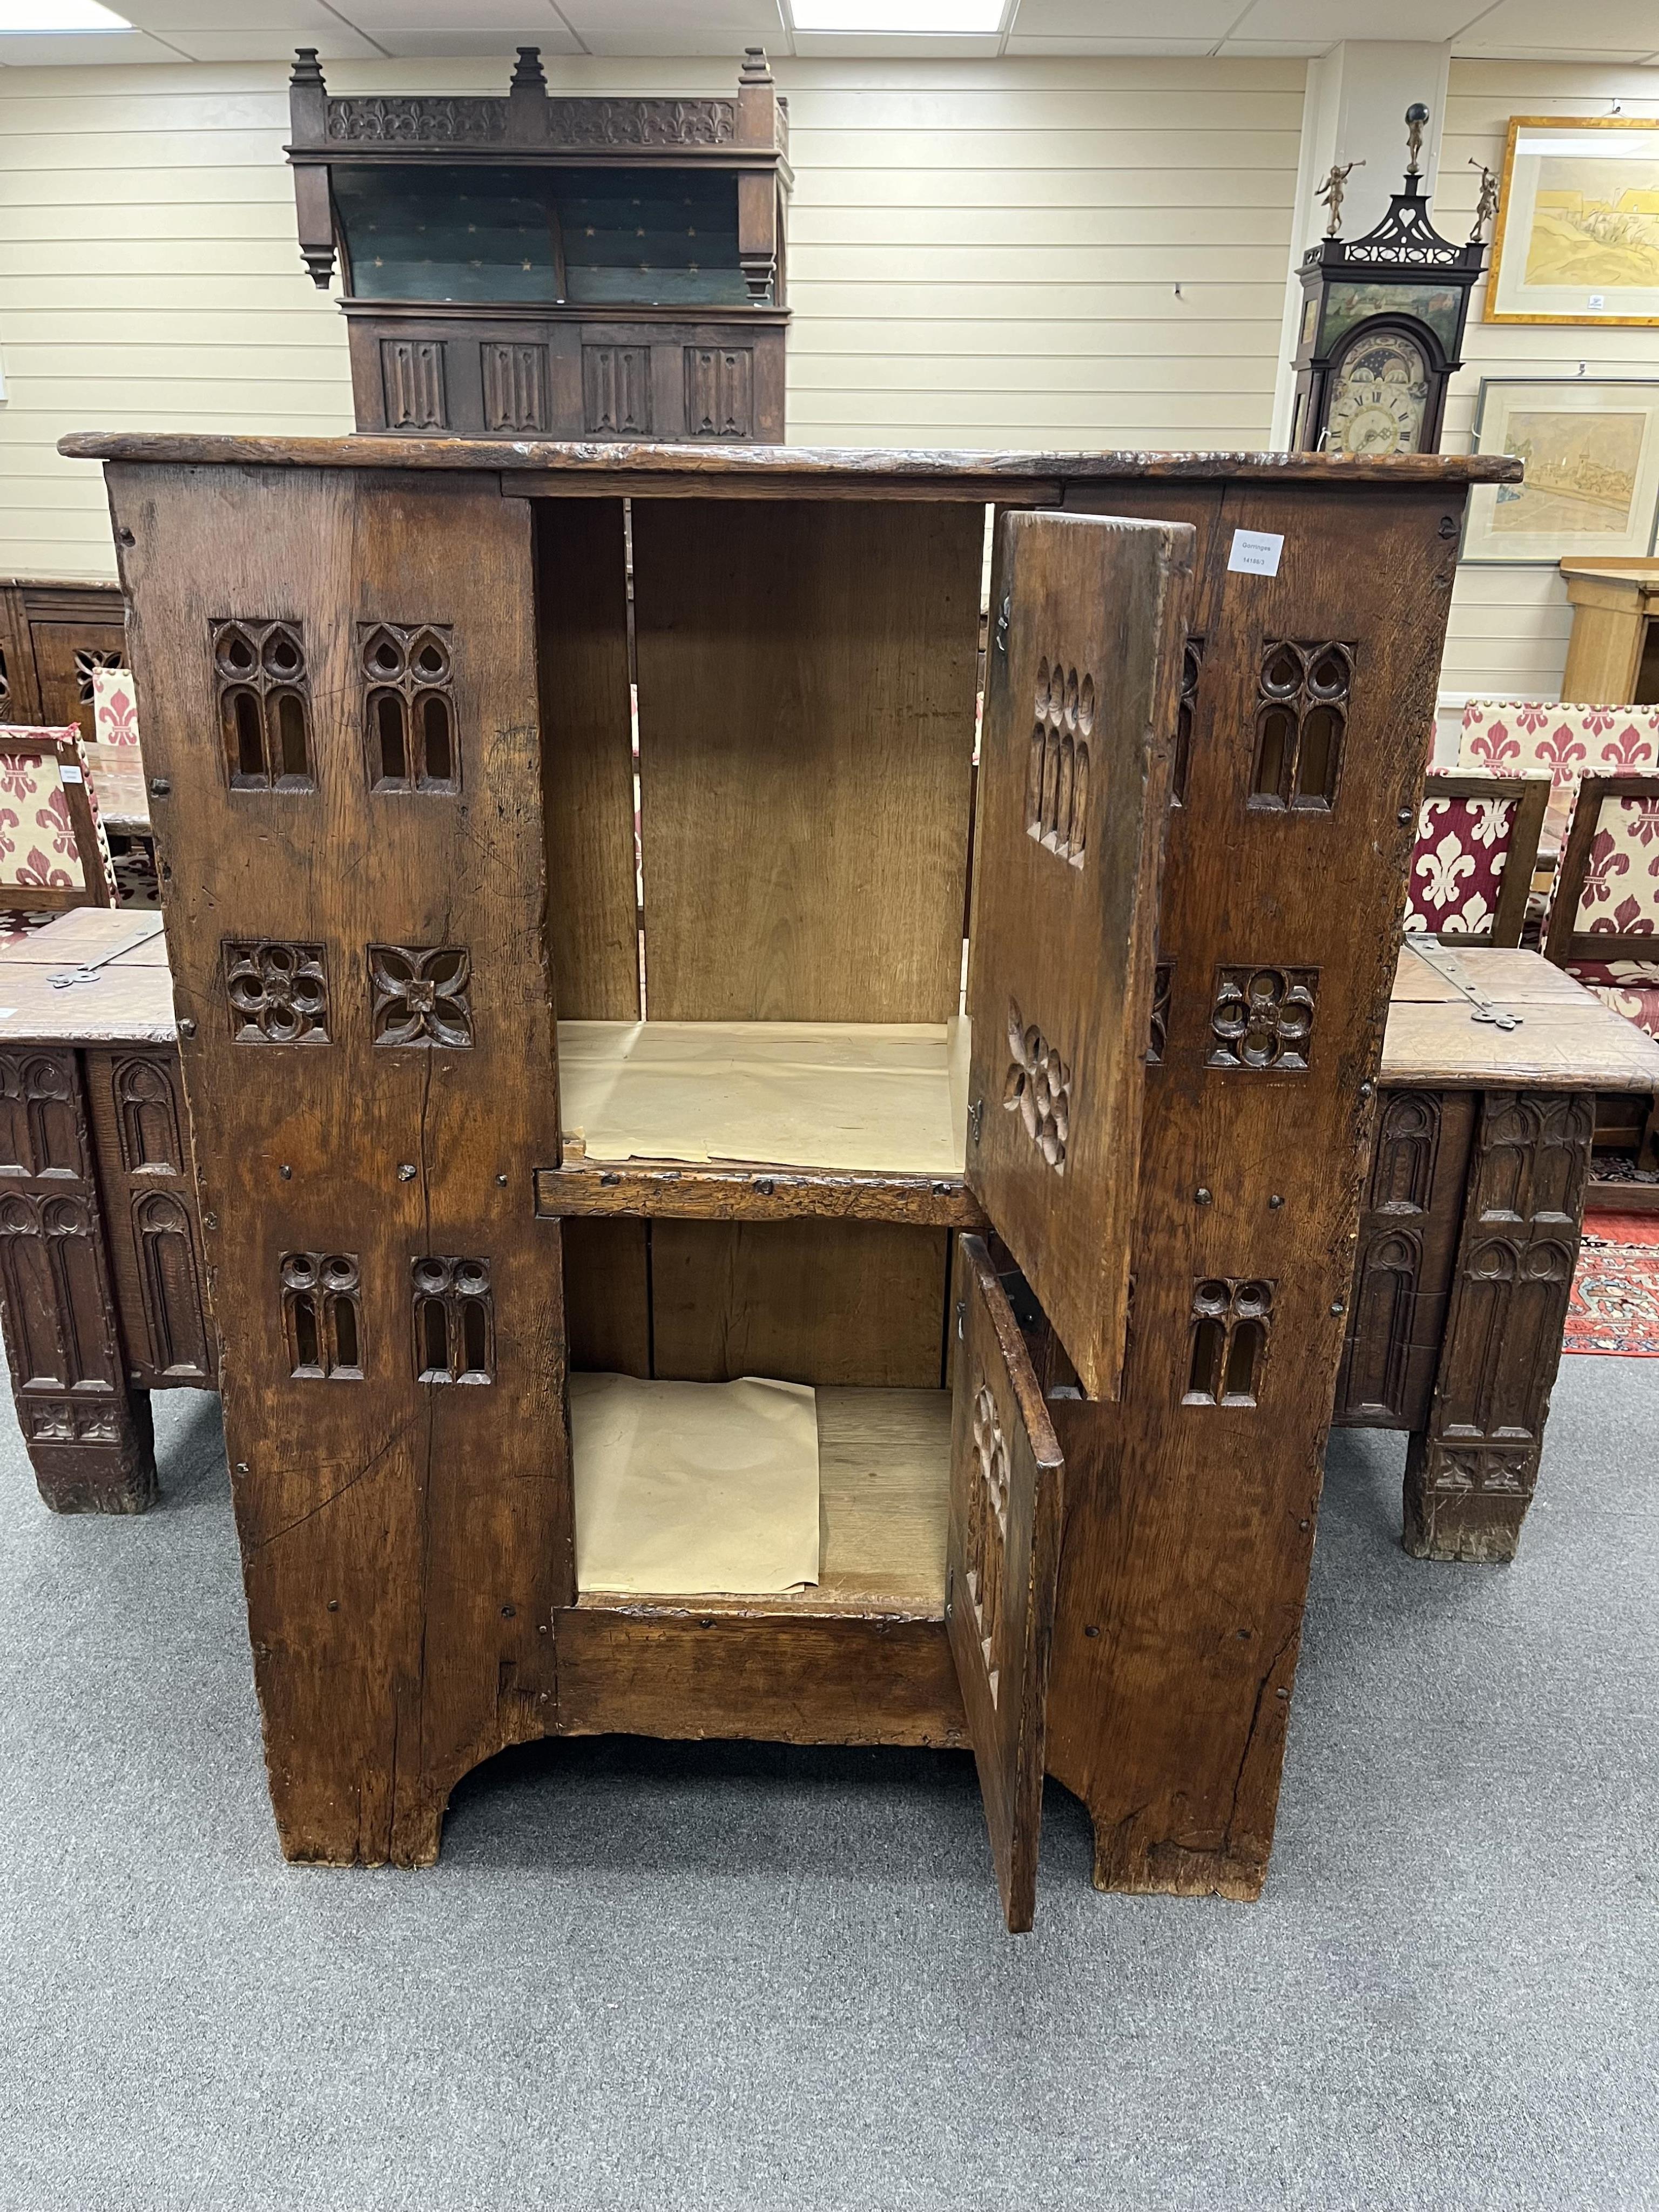 A large Gothic oak aumbry, in late 15th century style, with pierced fretwork panels, width 118cm, depth 53cm, height 151cm. Condition - good, Provenance - made for Brede Place, Brede, Rye, East Sussex. Commissioned from